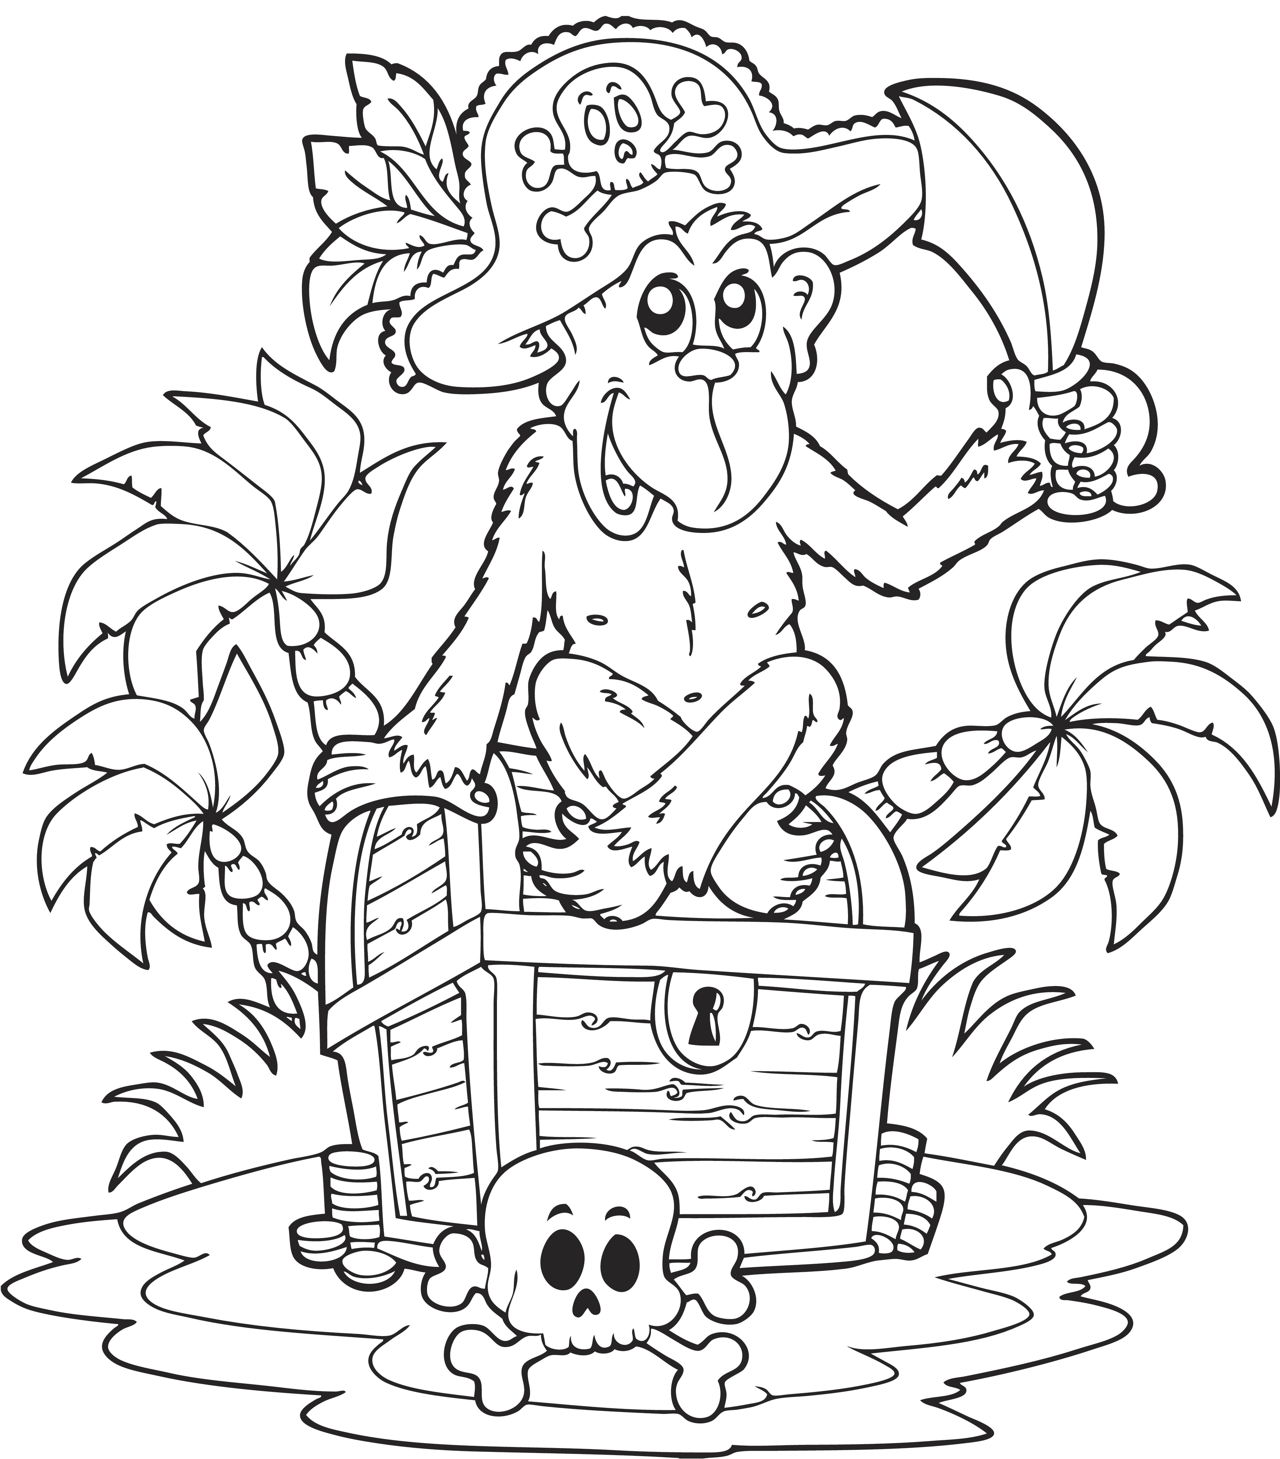 free-printable-pirate-coloring-pages-for-kids